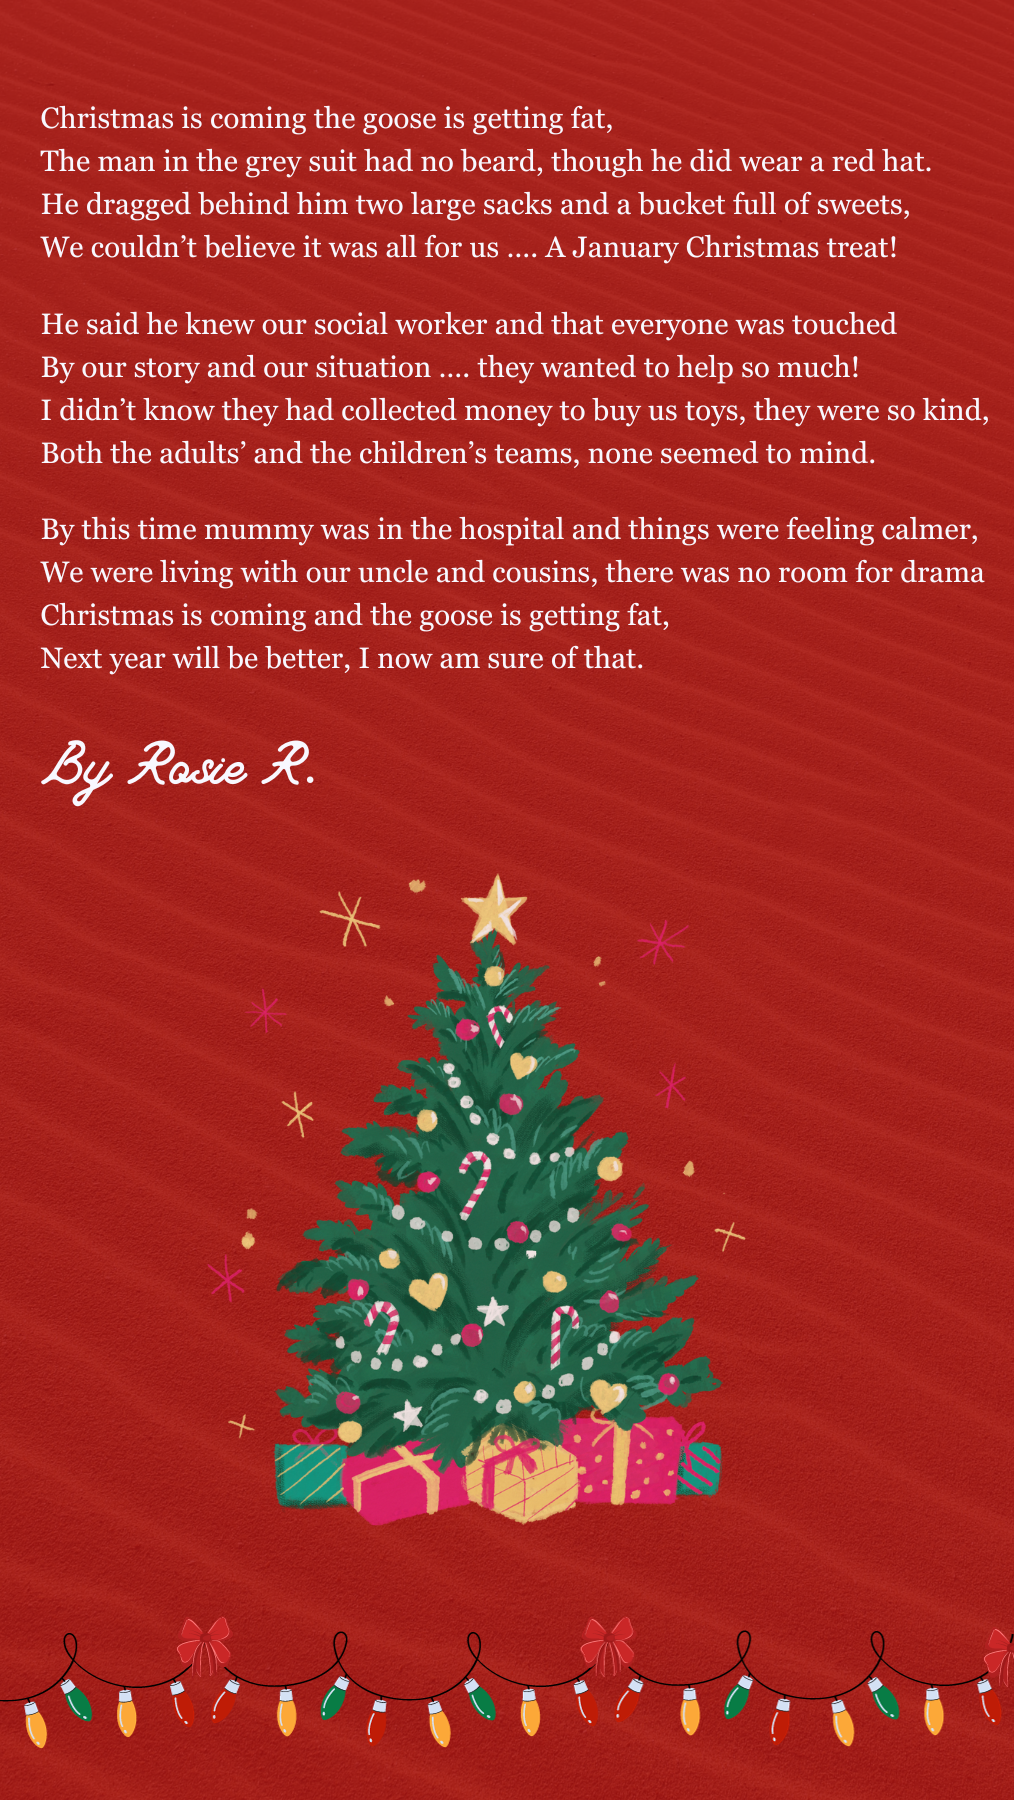 Christmas is coming poem